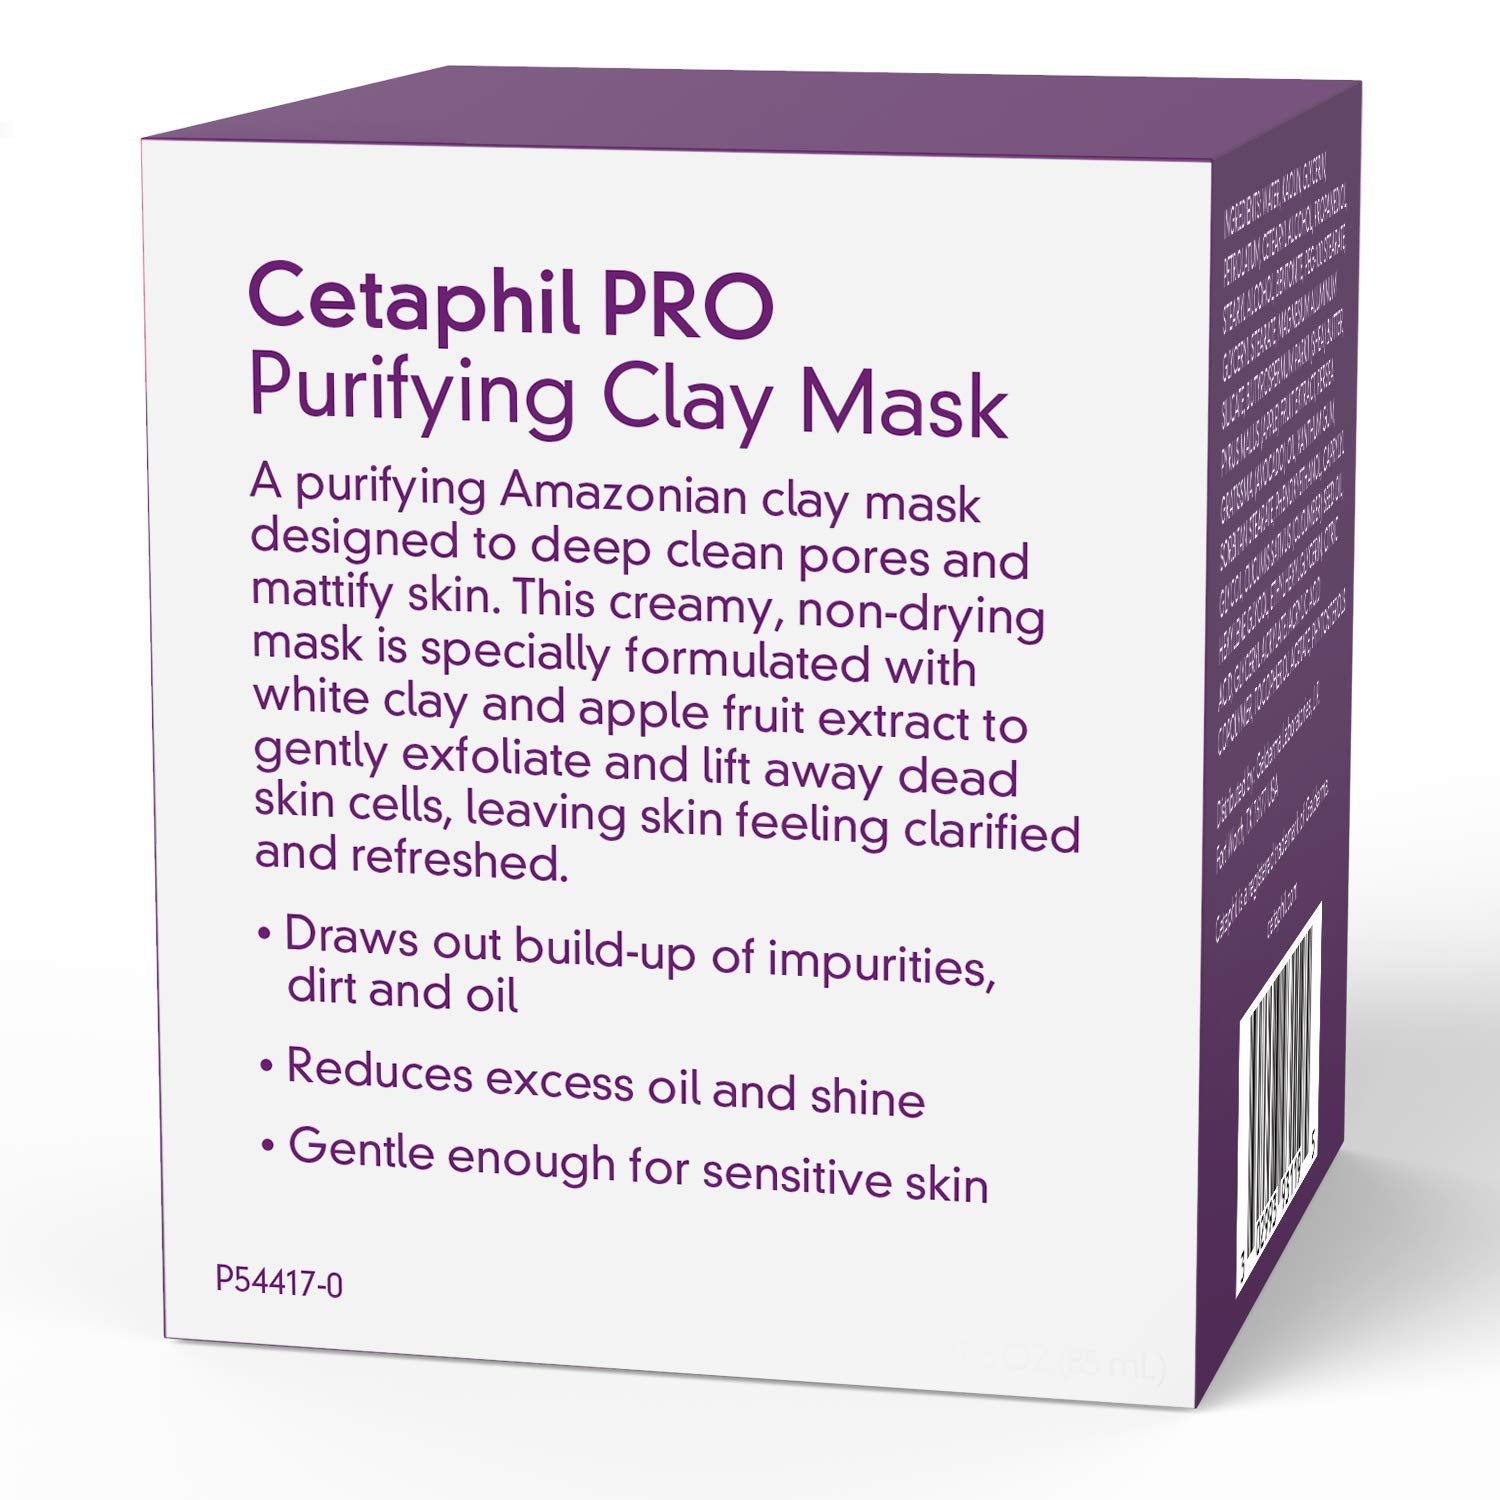 Pro Dermacontrol Purifying Clay Mask With bentonite Clay for Oily, Sensitive Skin, 3 Oz